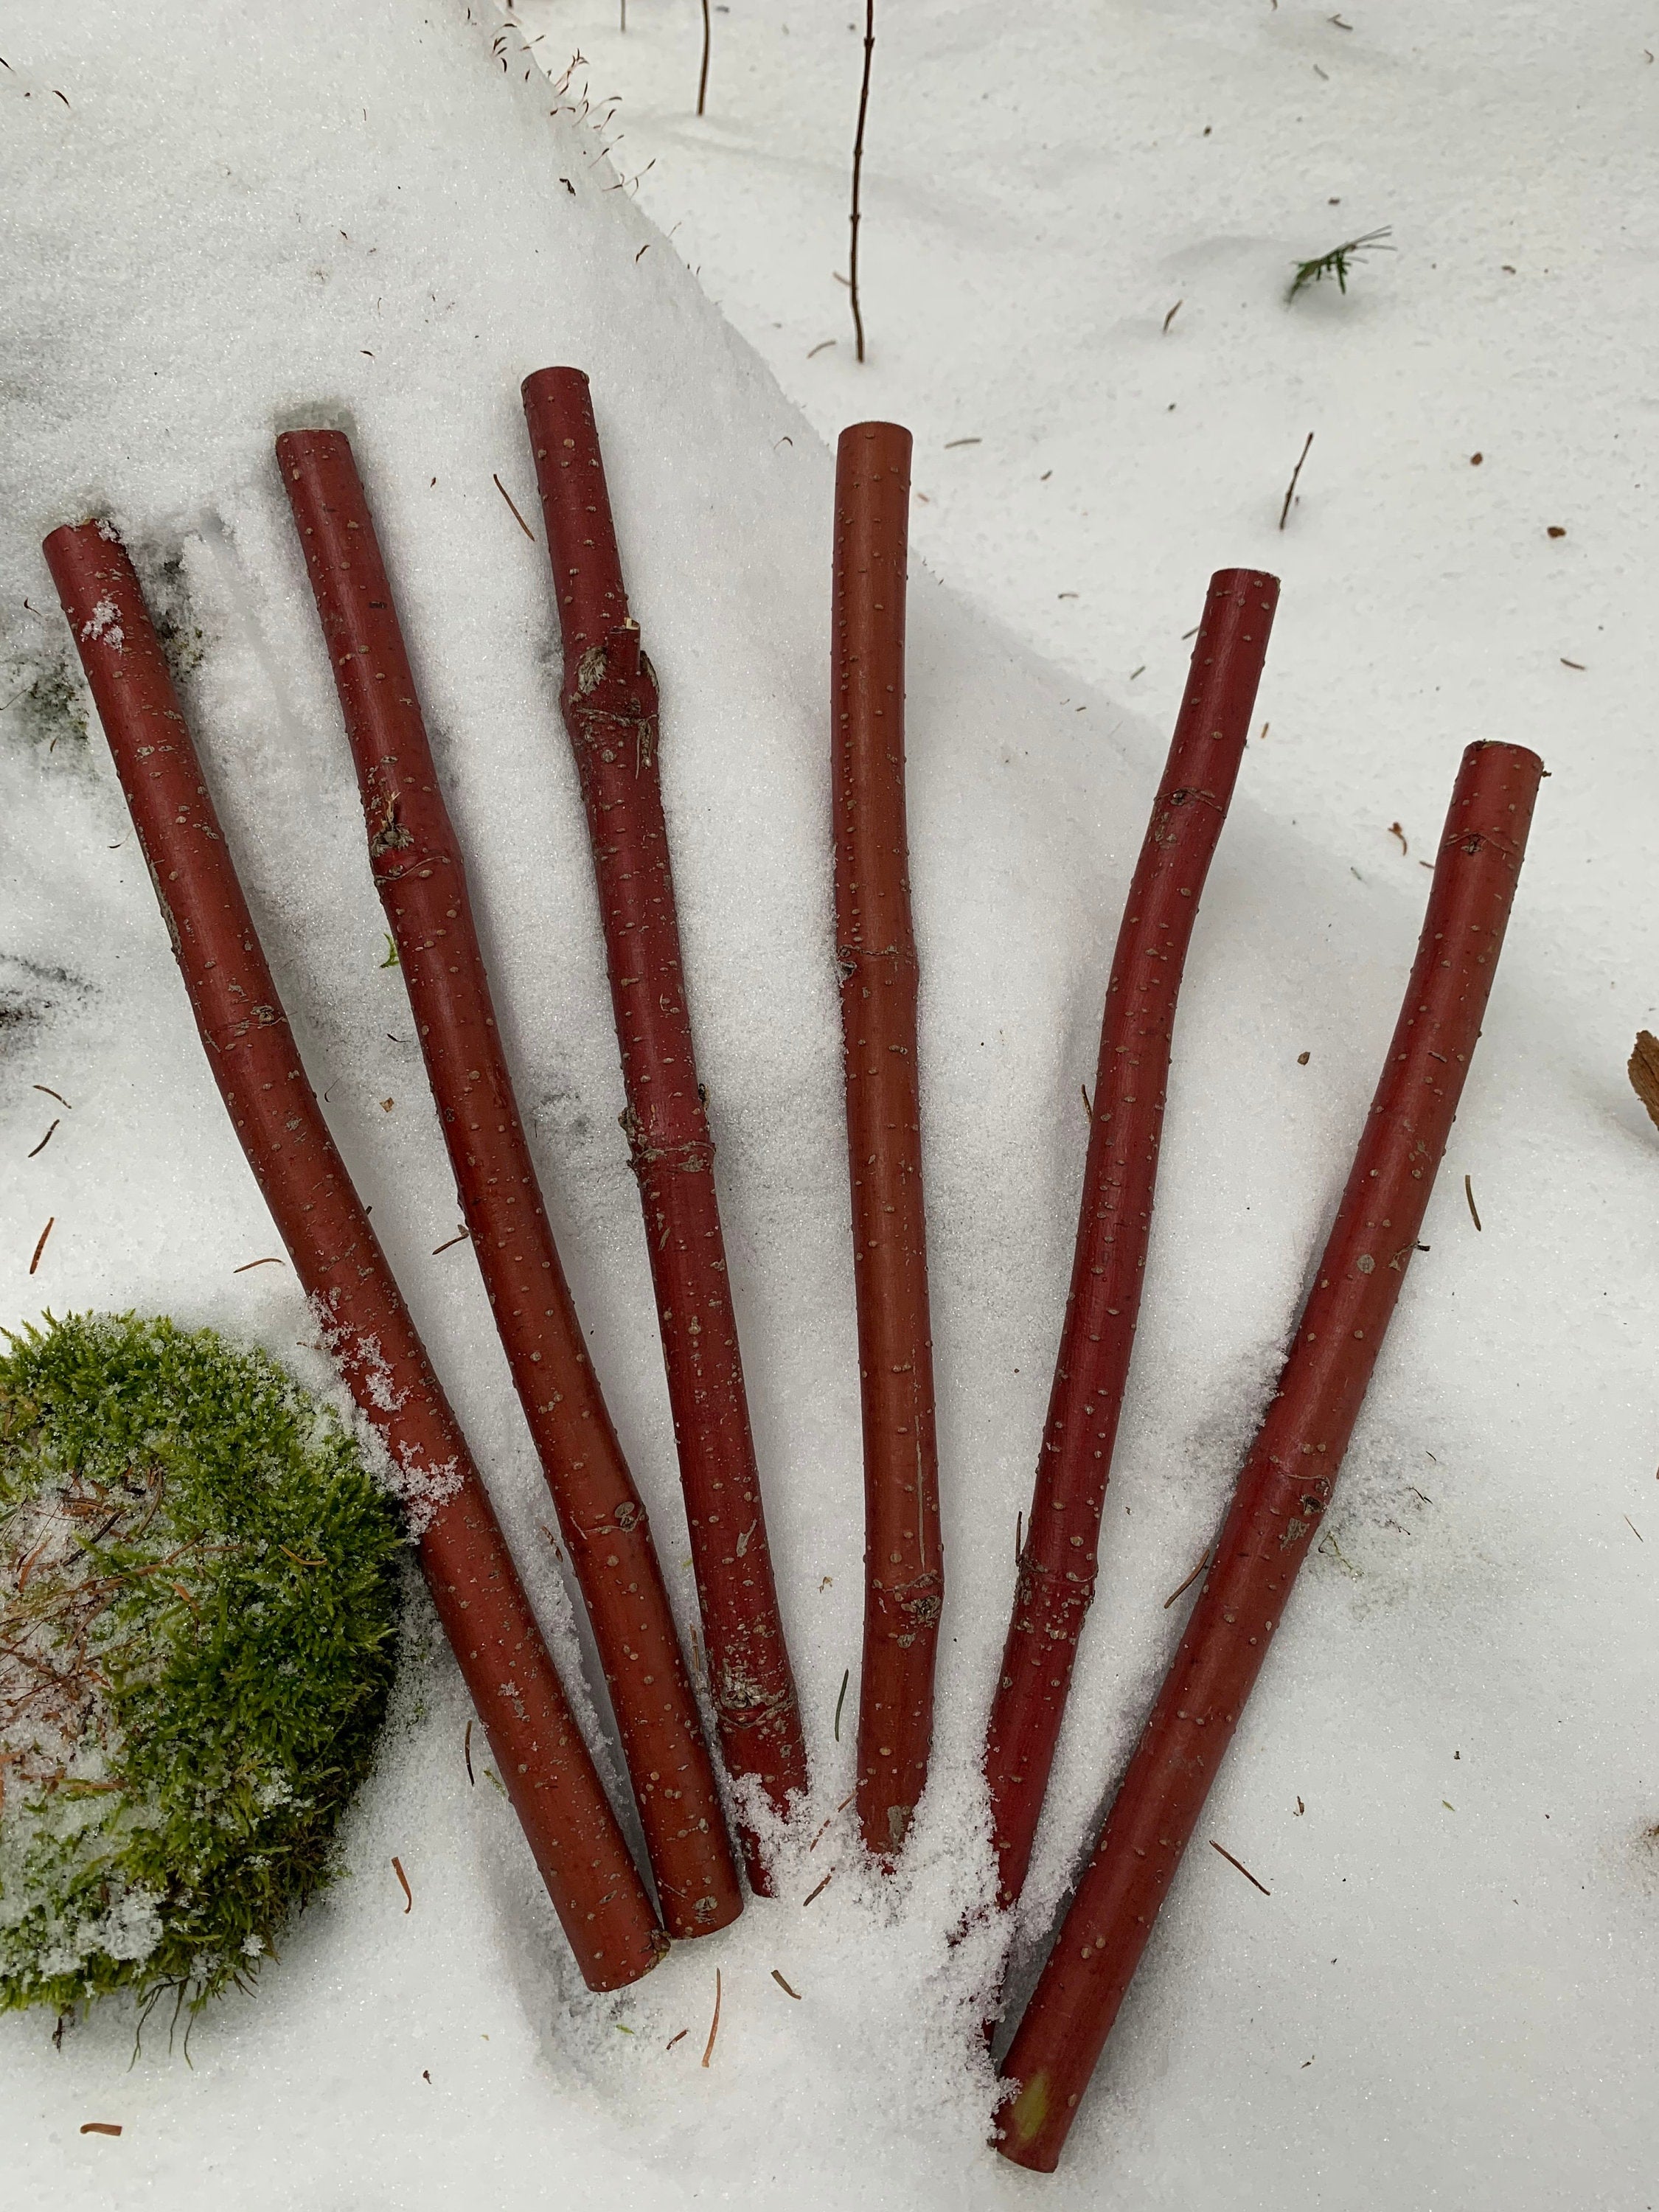 Dogwood Red Osier Branches, 6 pieces, 12 inches in length X 1/2 diameter